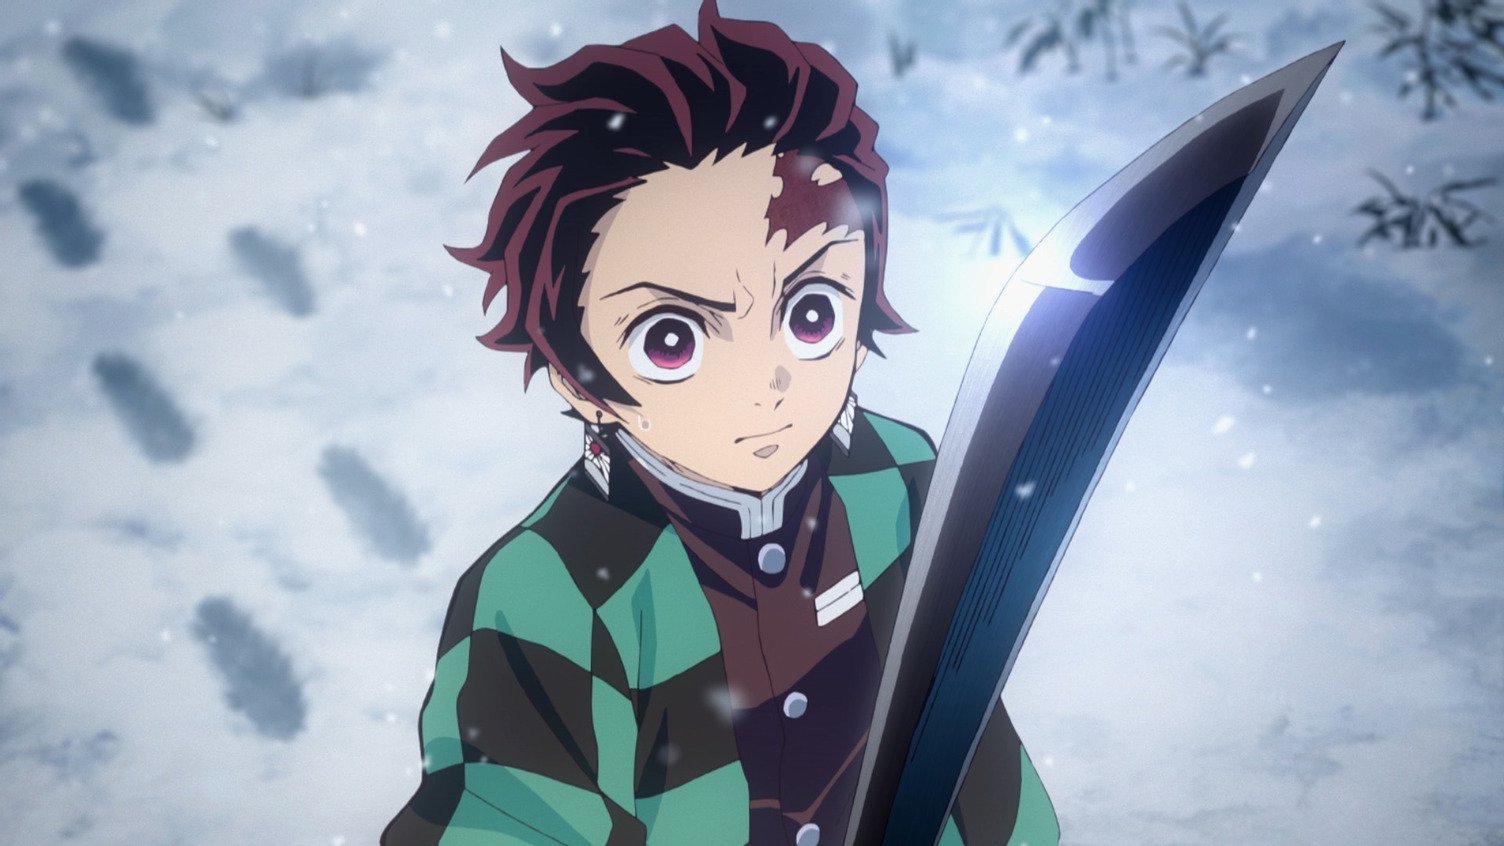 Demon Slayer': How Old Is Tanjiro, and How Does His Age Compare to